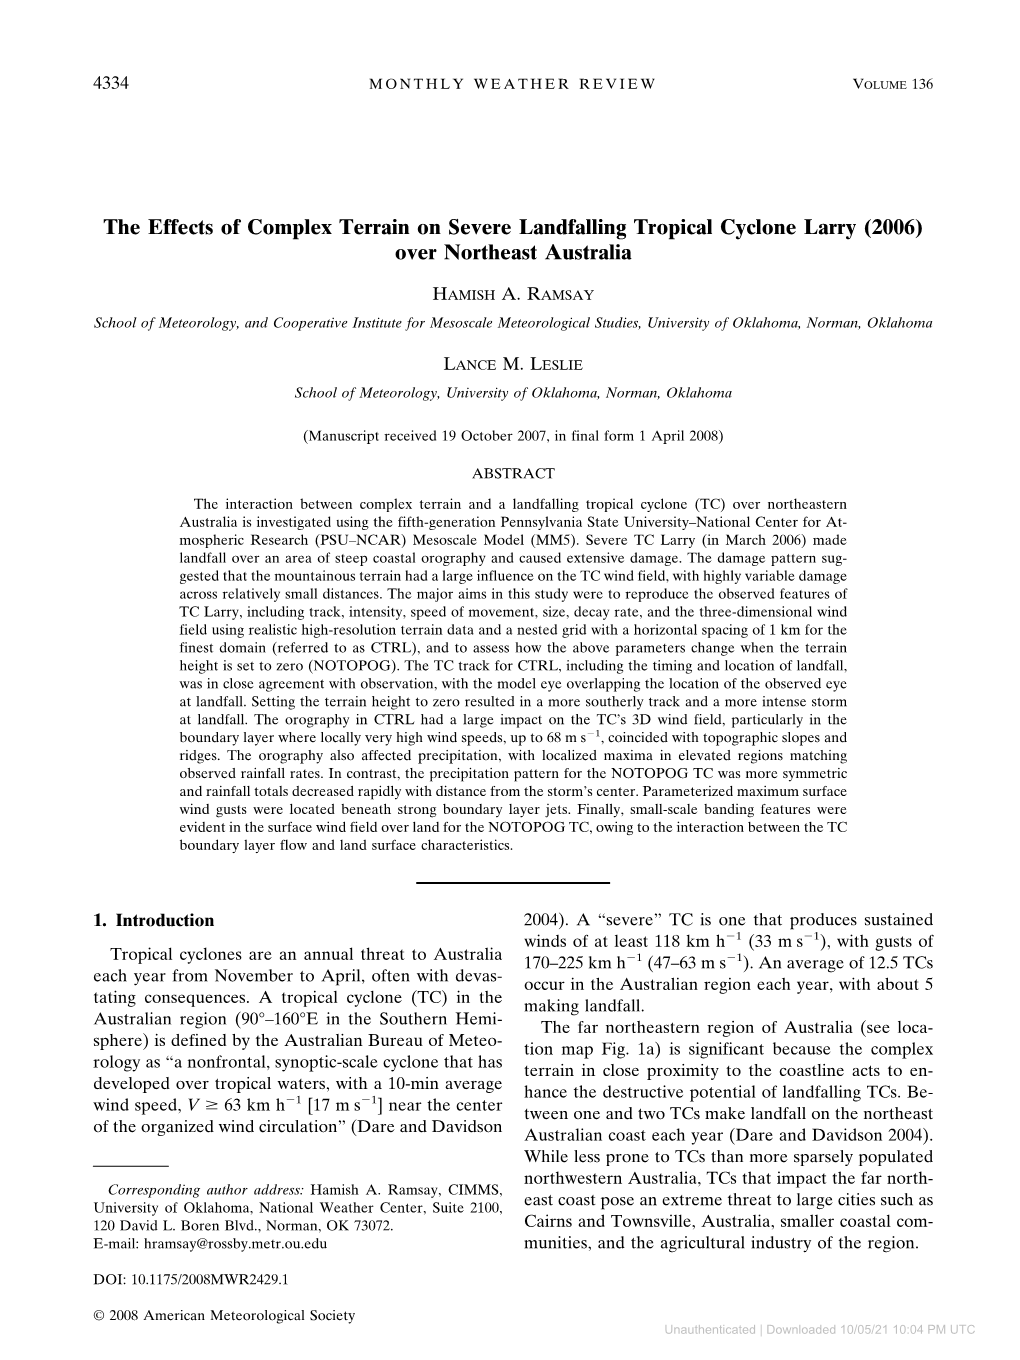 The Effects of Complex Terrain on Severe Landfalling Tropical Cyclone Larry (2006) Over Northeast Australia